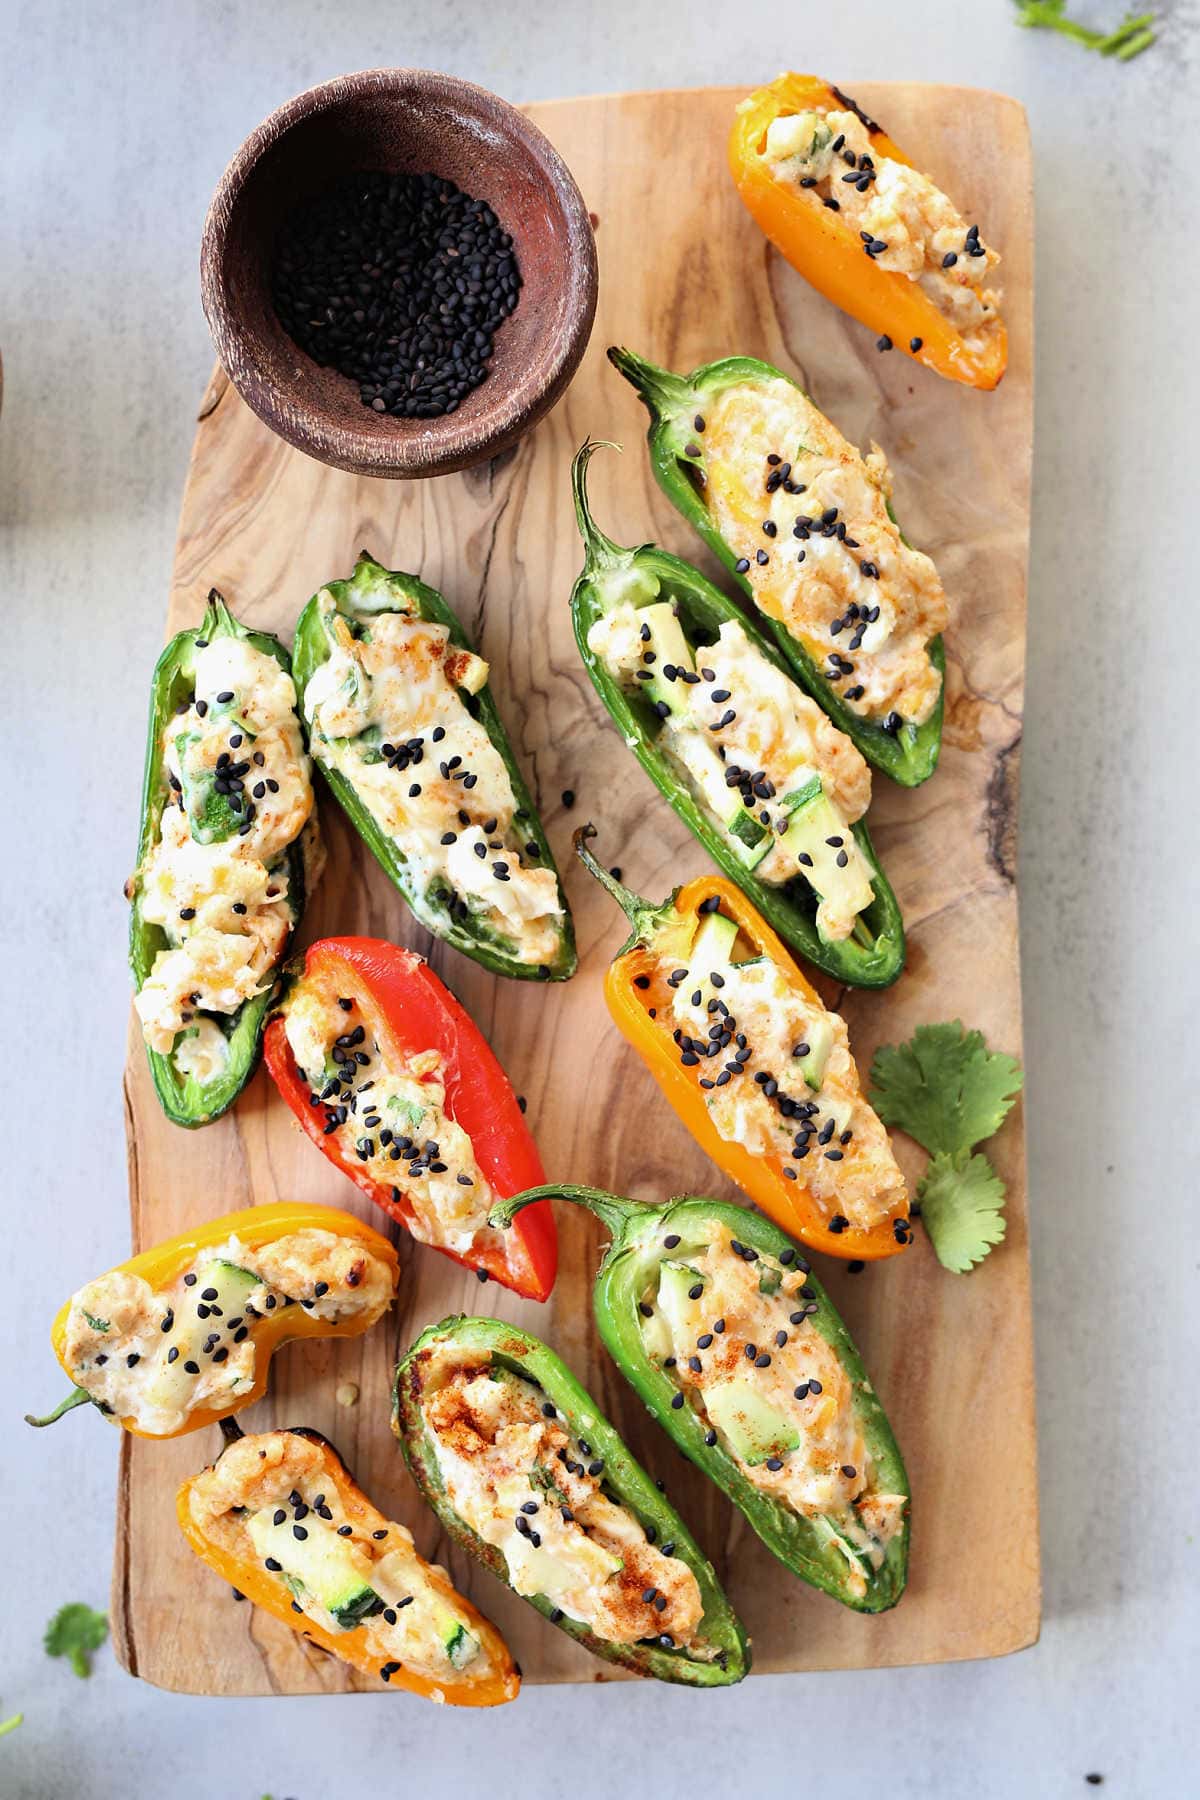 Grilled stuffed jalapenos and mini sweet peppers filled with cream cheese on a wood appetizer board.